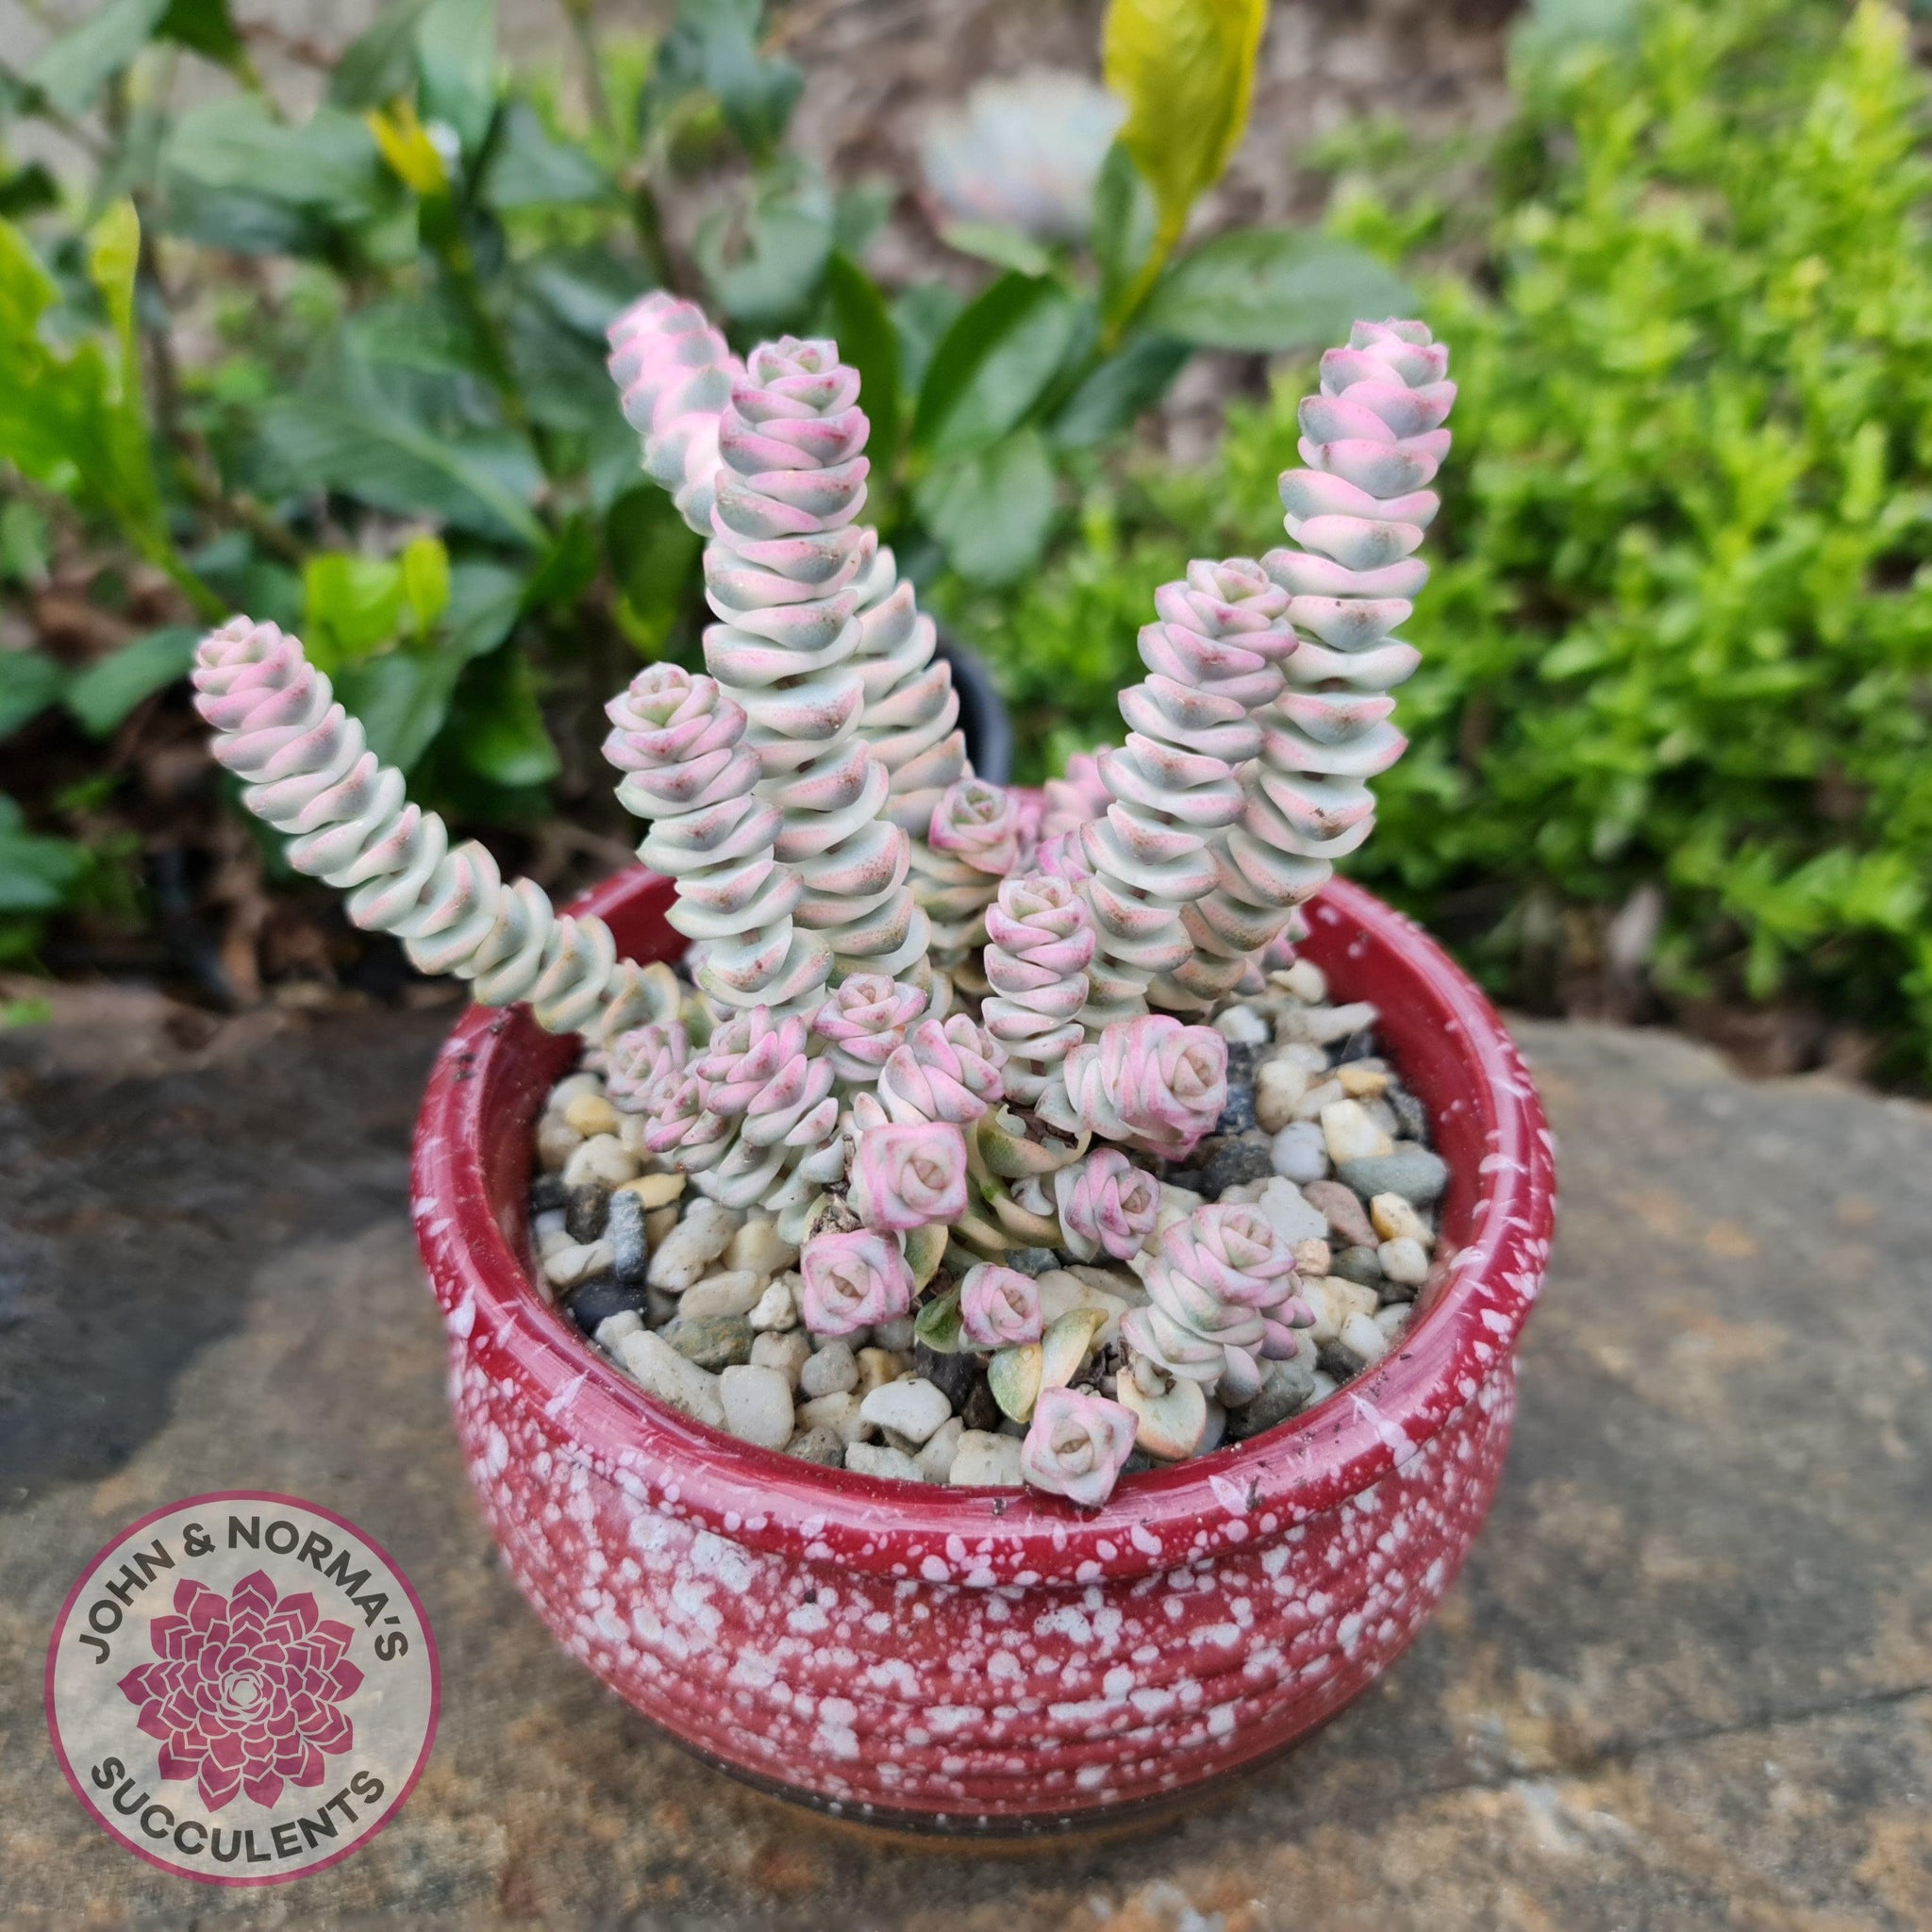 UGALOO Succulent Live Plant String of Buttons Crassula perforata -  Succulent Plant : Amazon.in: Garden & Outdoors